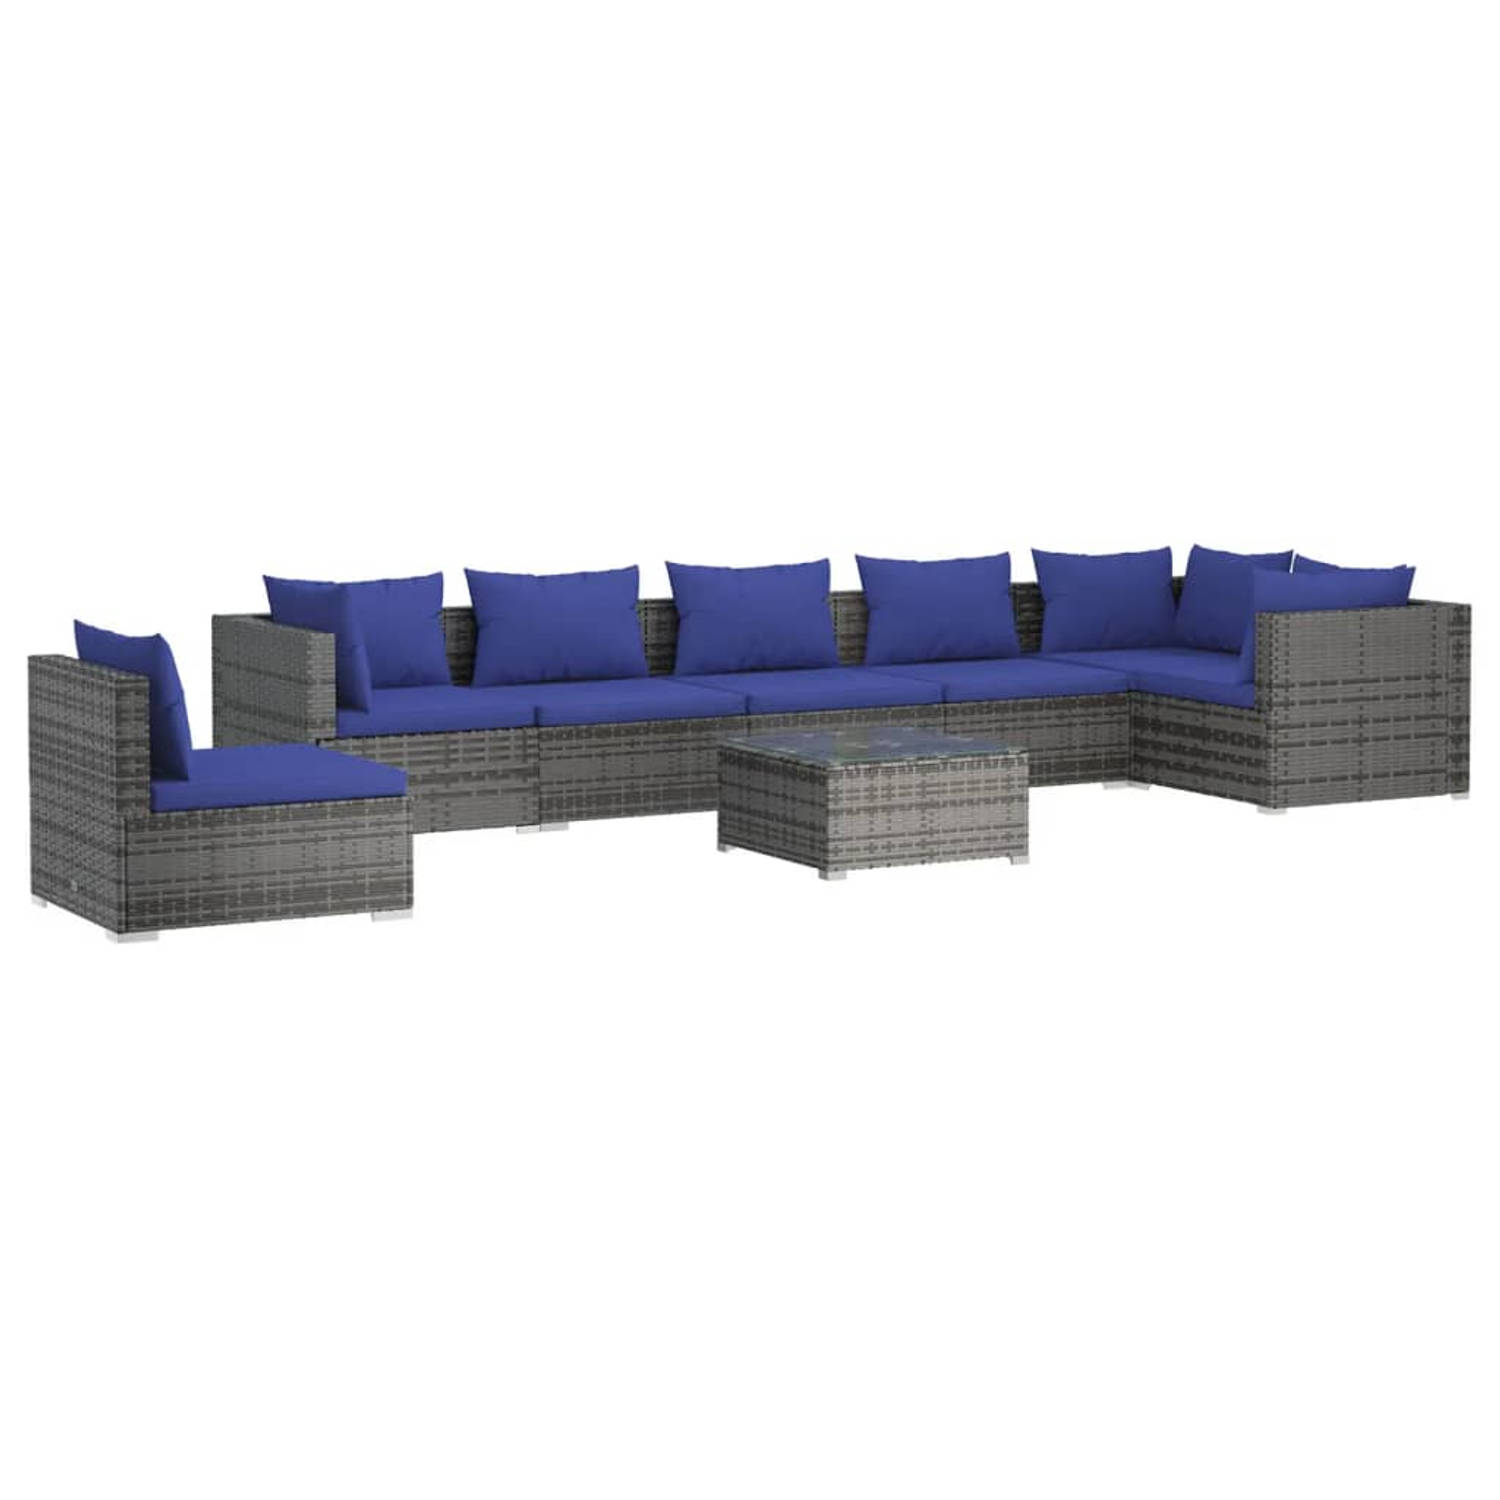 The Living Store Loungeset - Modulair - Grijs - donkerblauw - PE-rattan - Staal frame - Waterdicht - 70x70x60.5 - 60x60x30 - incl - kussens - The Living Store